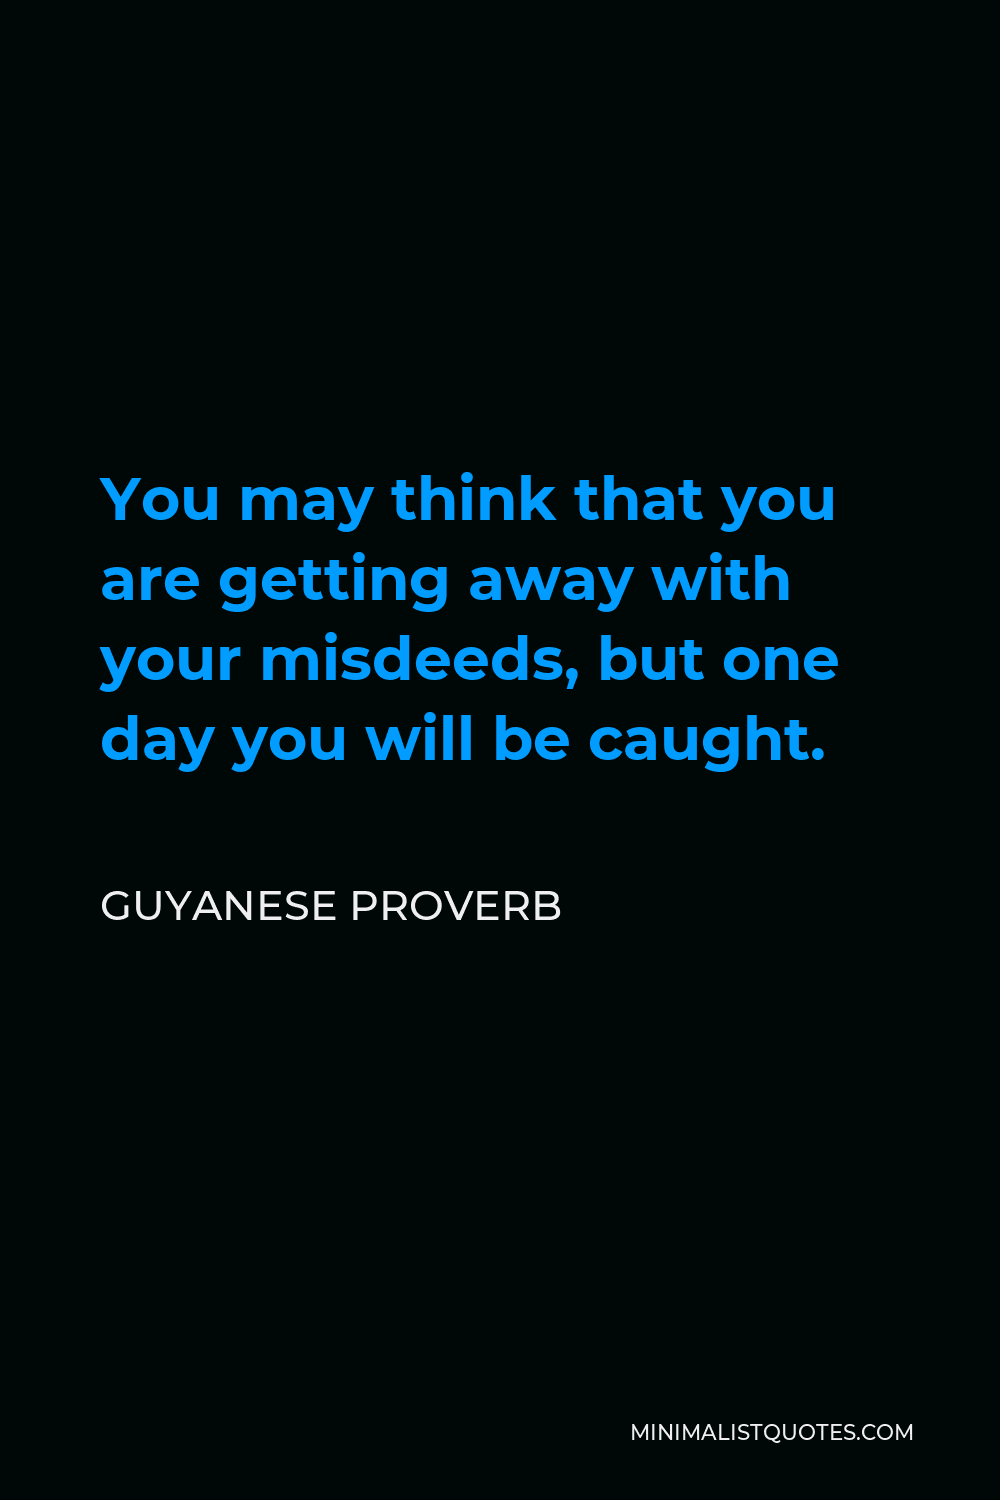 Guyanese Proverb Quote - You may think that you are getting away with your misdeeds, but one day you will be caught.